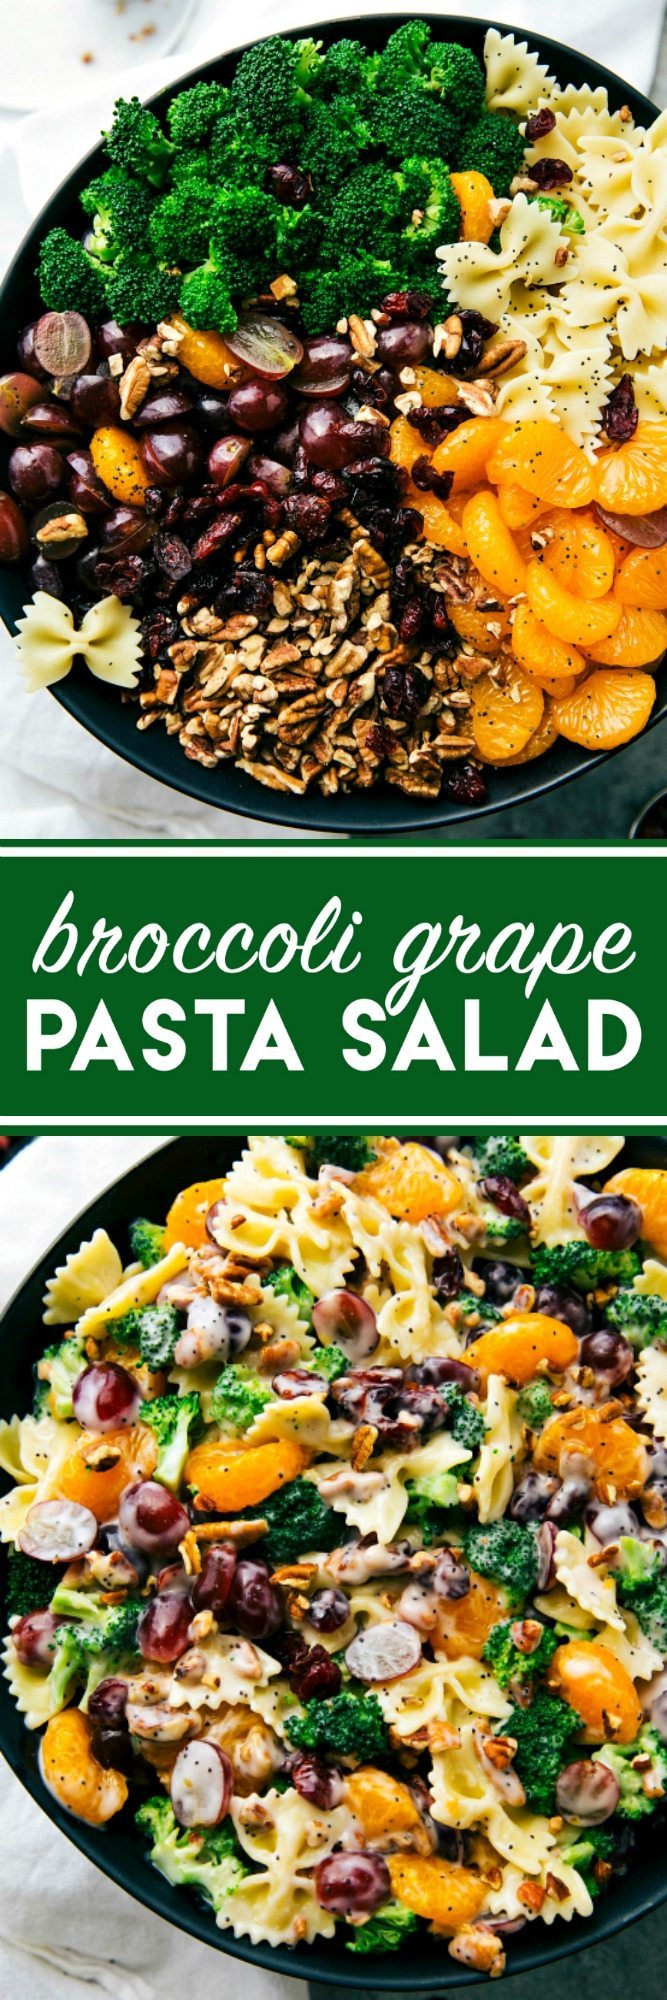 Brought this salad to a potluck and people were BEGGING for the recipe!! (Reader Comment) The best ever BROCCOLI PASTA SALAD. Quick to make, 5-ingredient dressing, and sure to be a hit! Via chelseasmessyapron.com